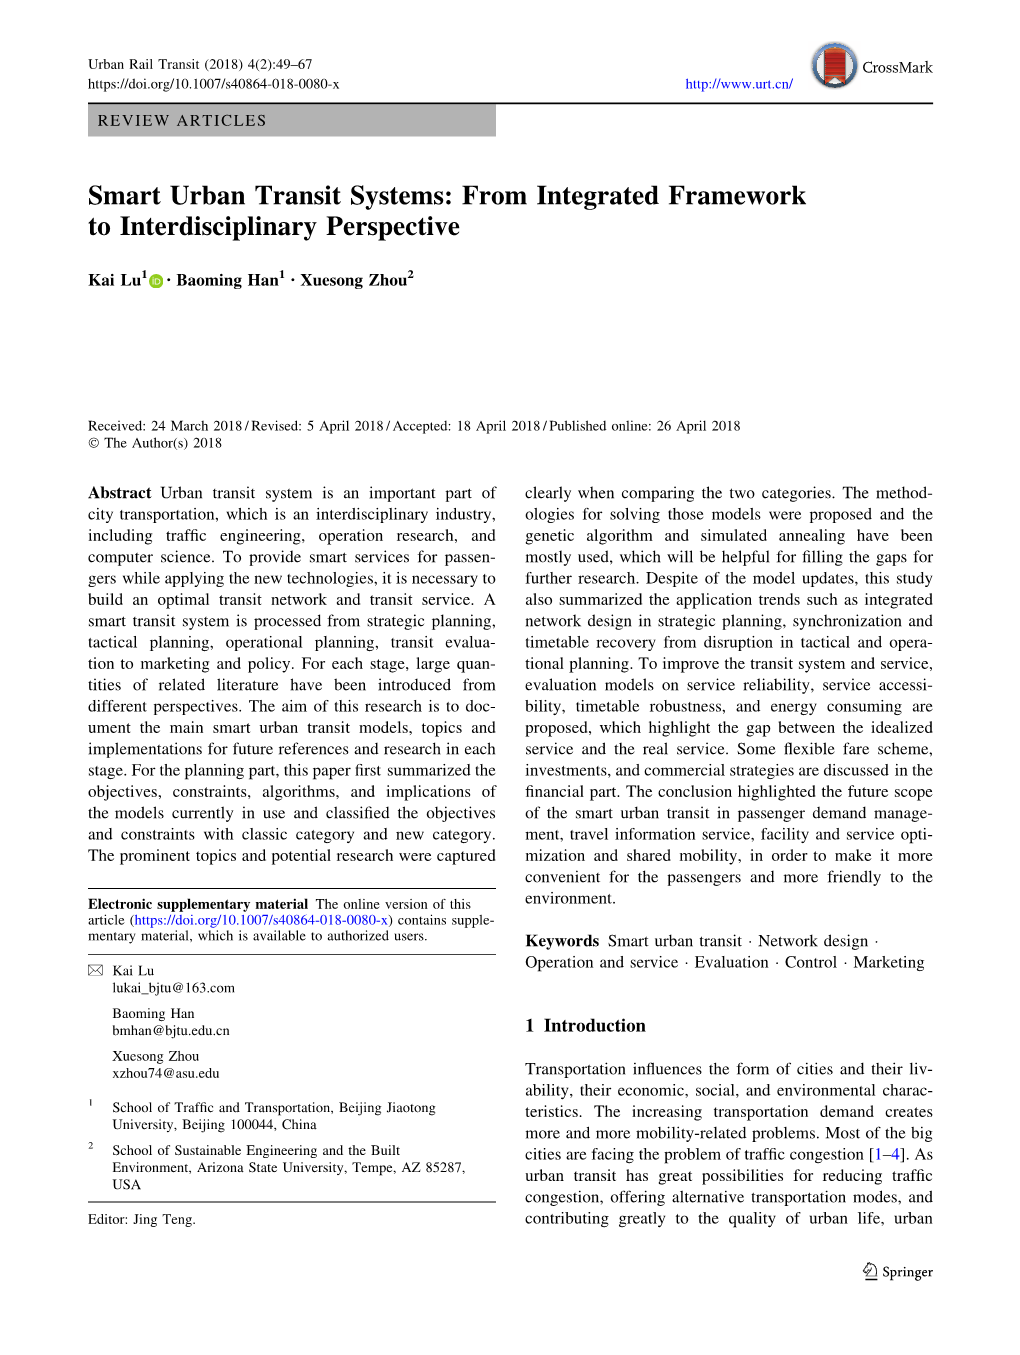 Smart Urban Transit Systems: from Integrated Framework to Interdisciplinary Perspective